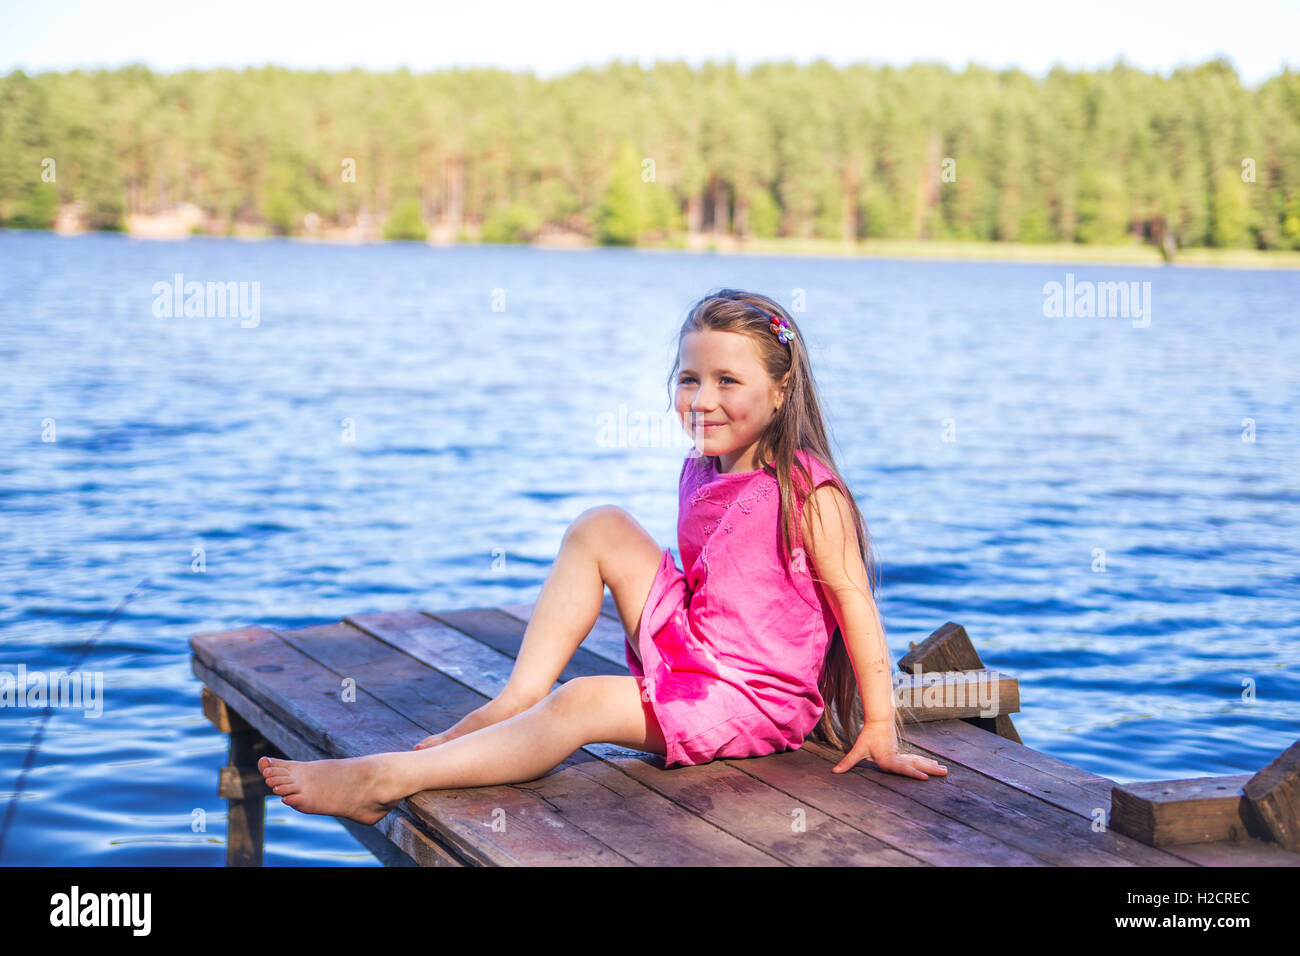 little girl drawing outdoors nature rest forest Stock Photo